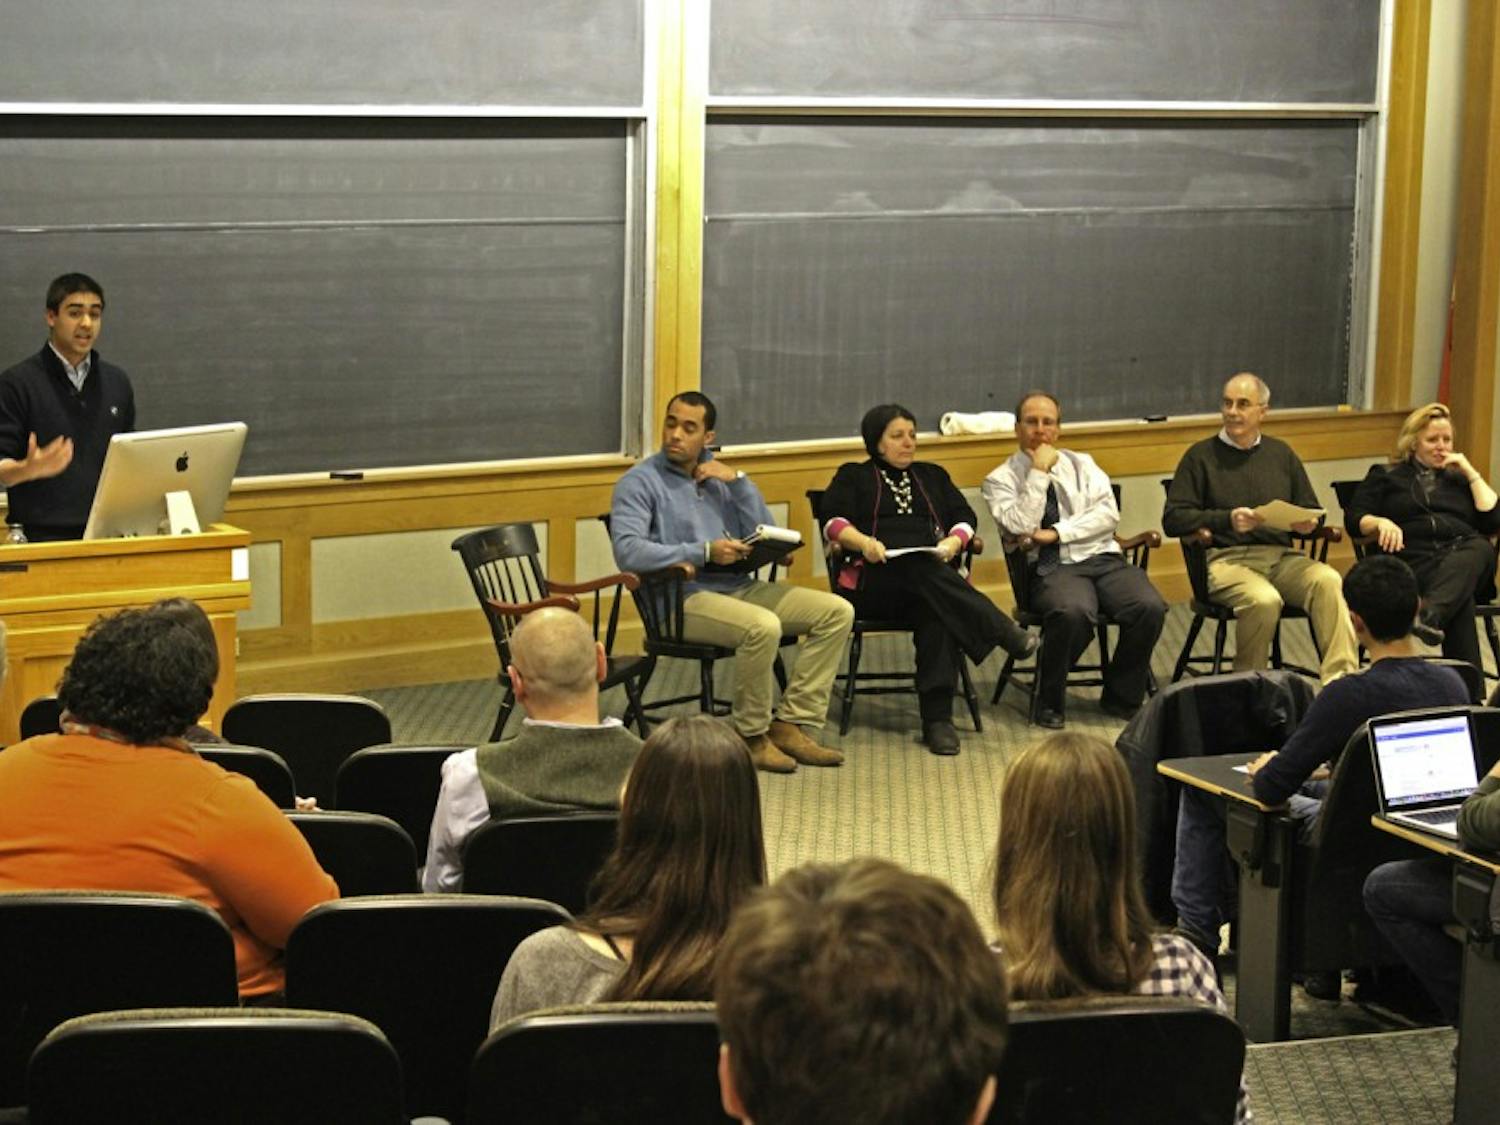 A panel of administrators answered student questions about “Moving Dartmouth Forward.”